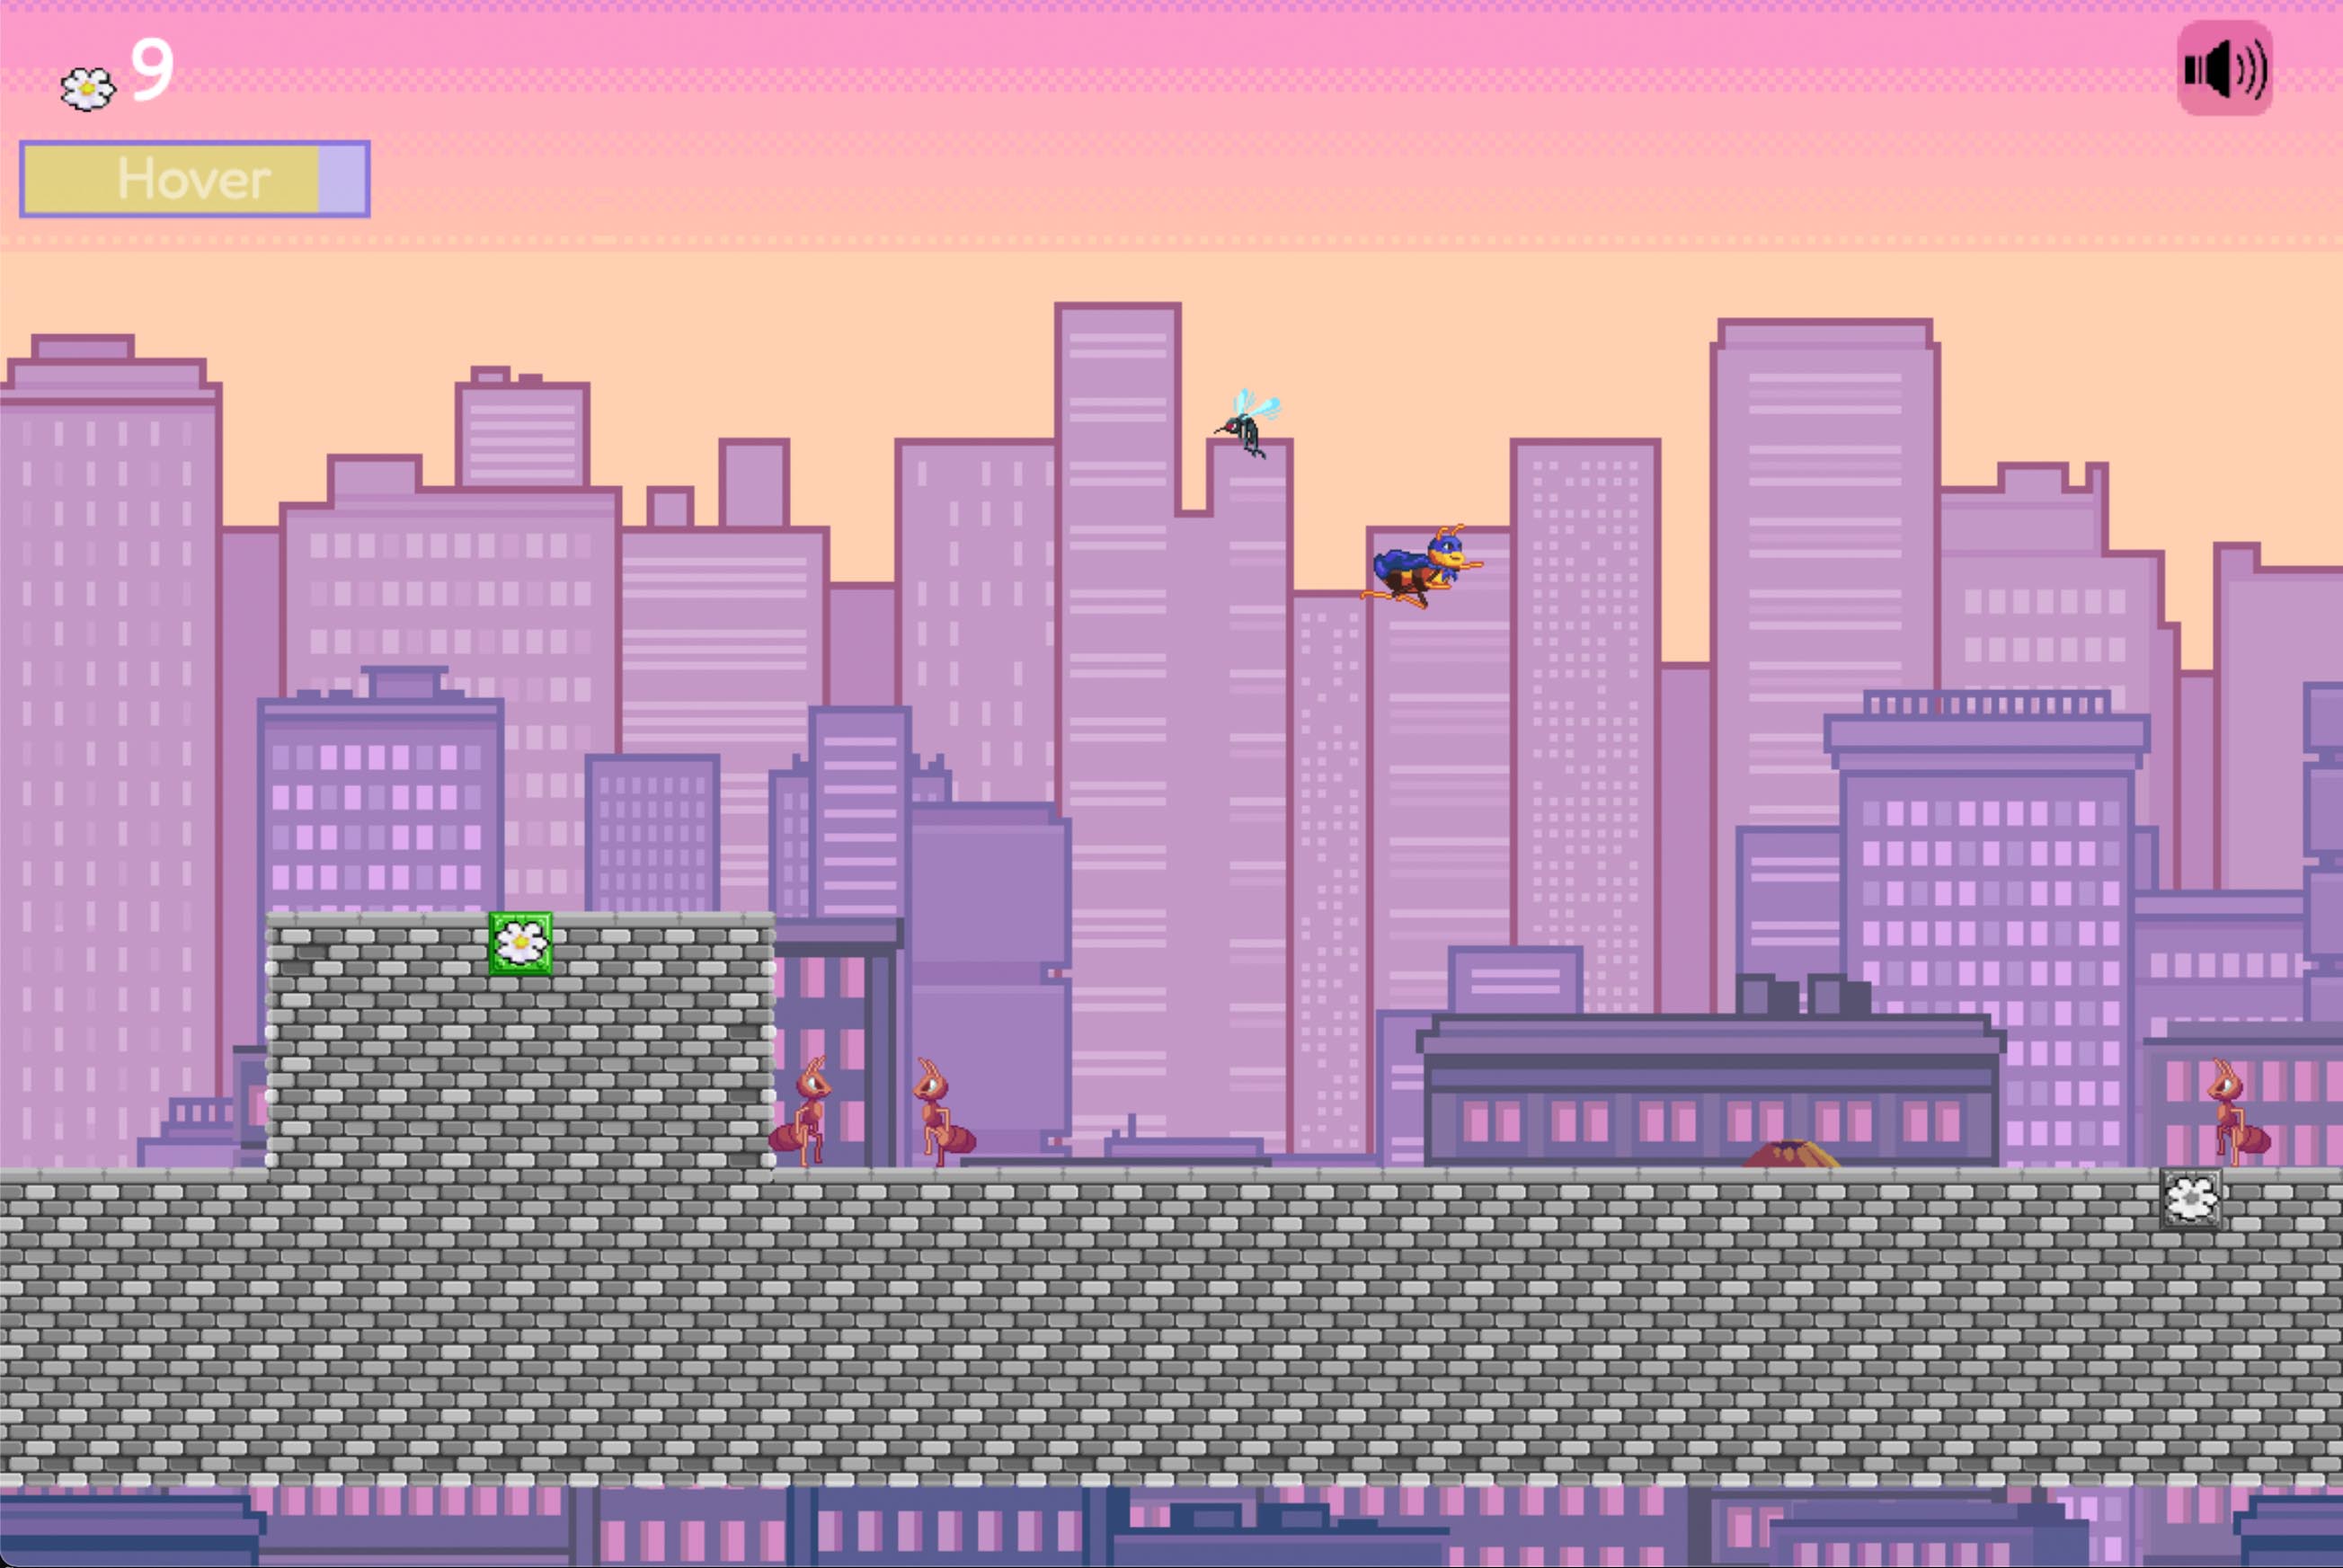 This is a screenshot from Homophone Bee. The player flying past enemy insects in the city sky during sunset.